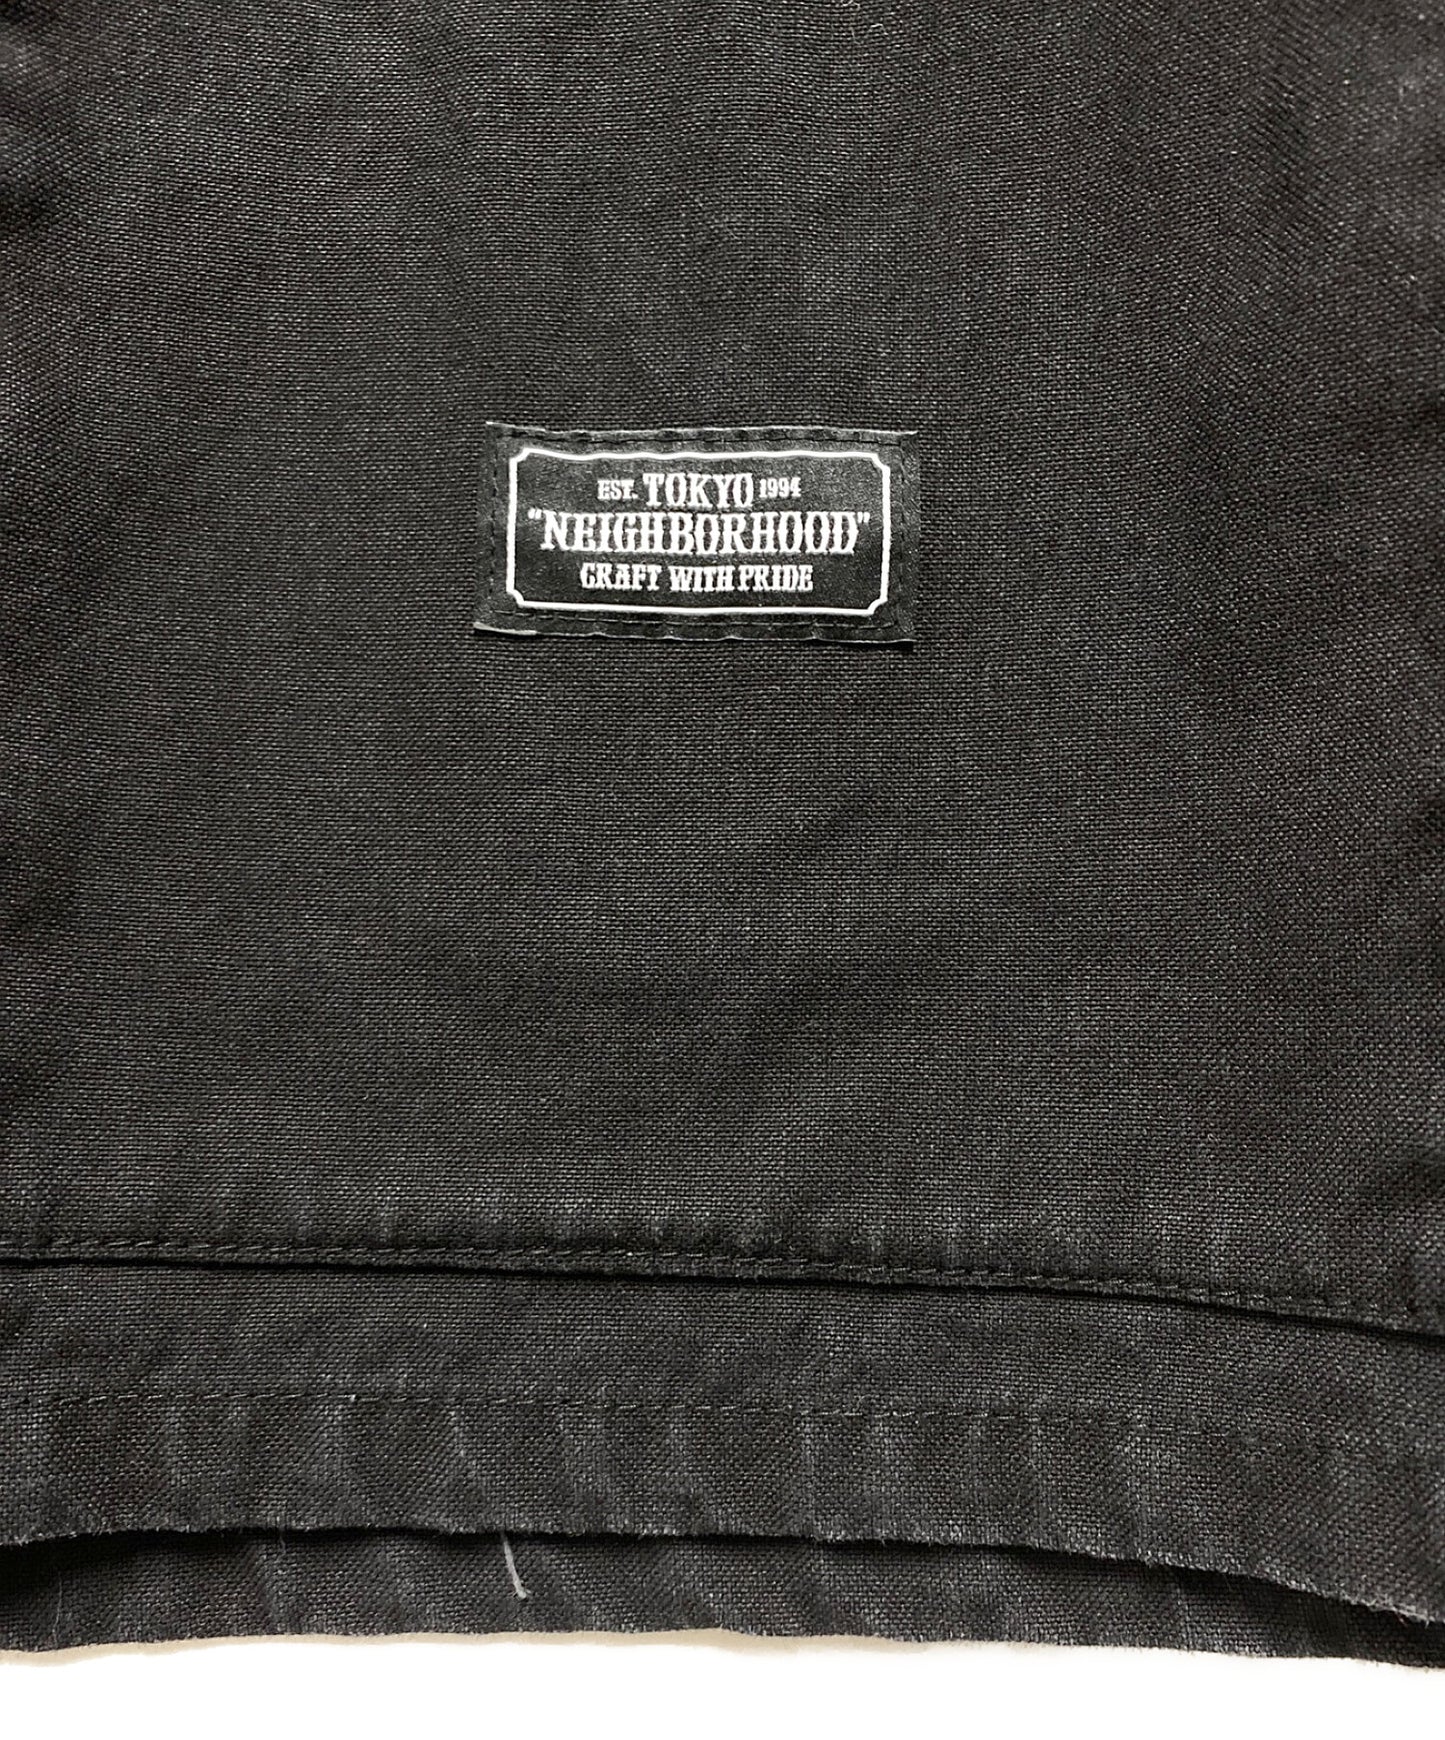 [Pre-owned] NEIGHBORHOOD COVERALL.CW 192ARNH-JKM01